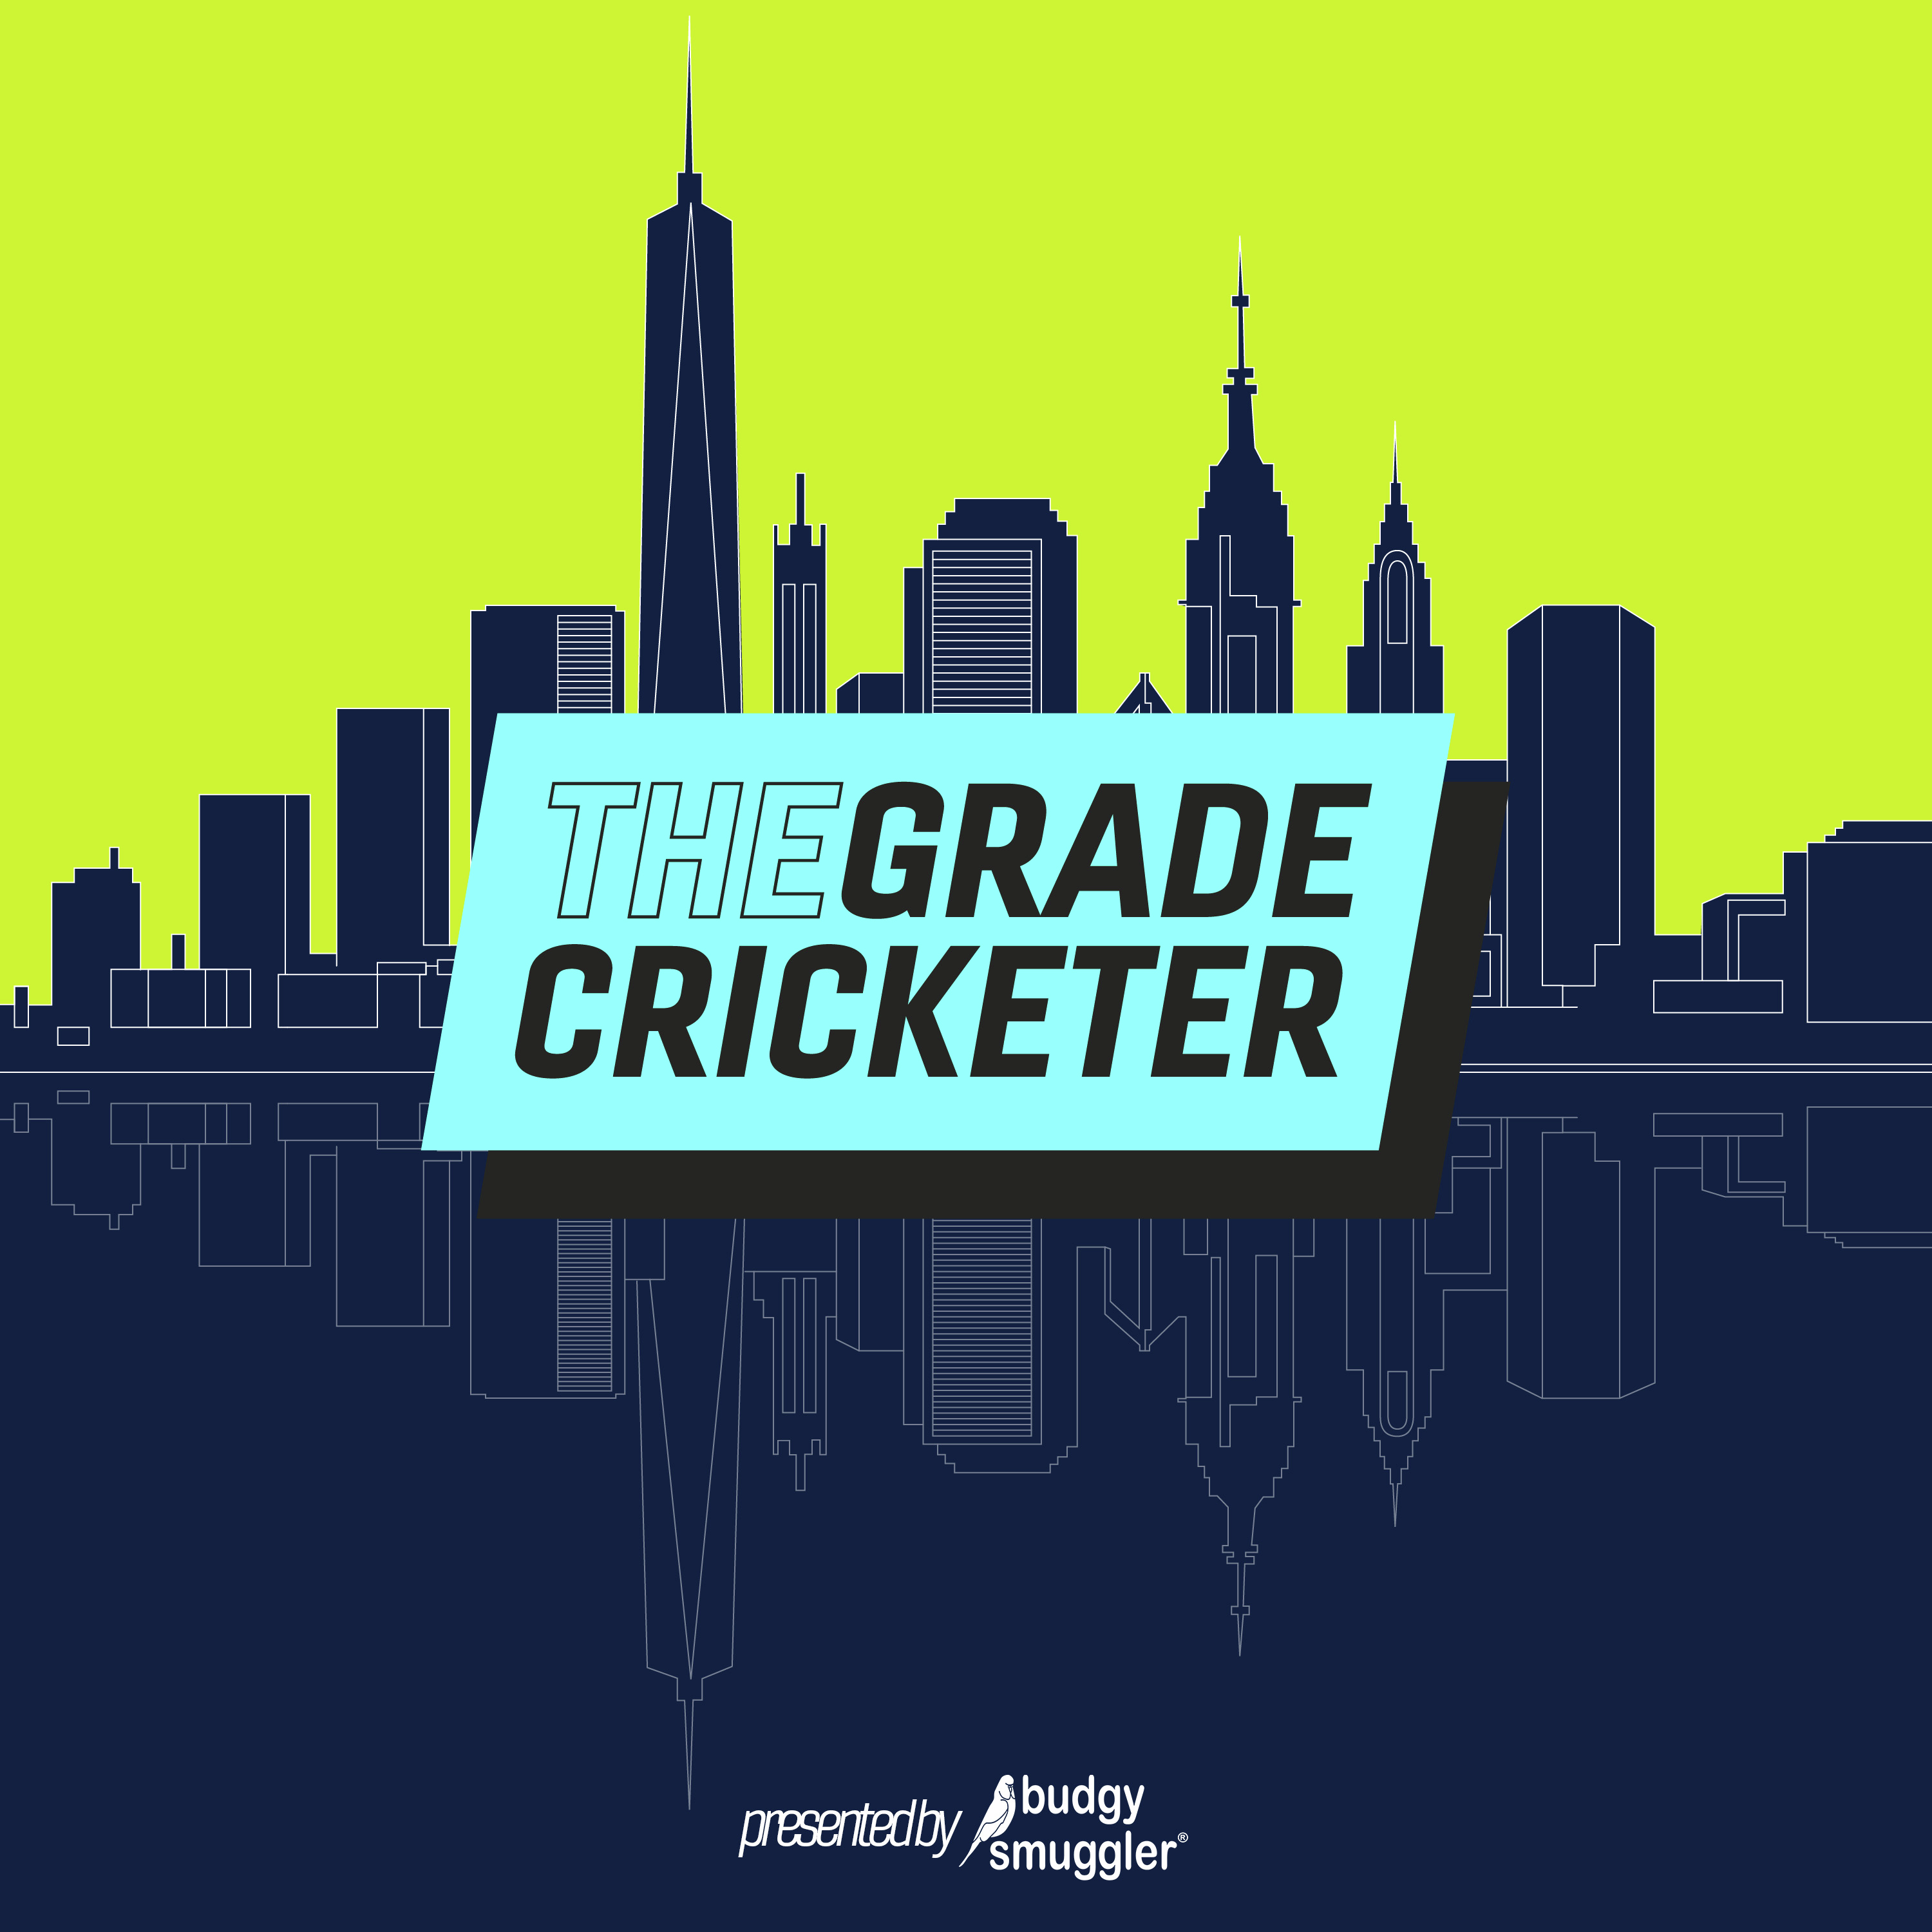 217. It's Park Cricket, Mate, with Ed Cowan & Barney Ronay